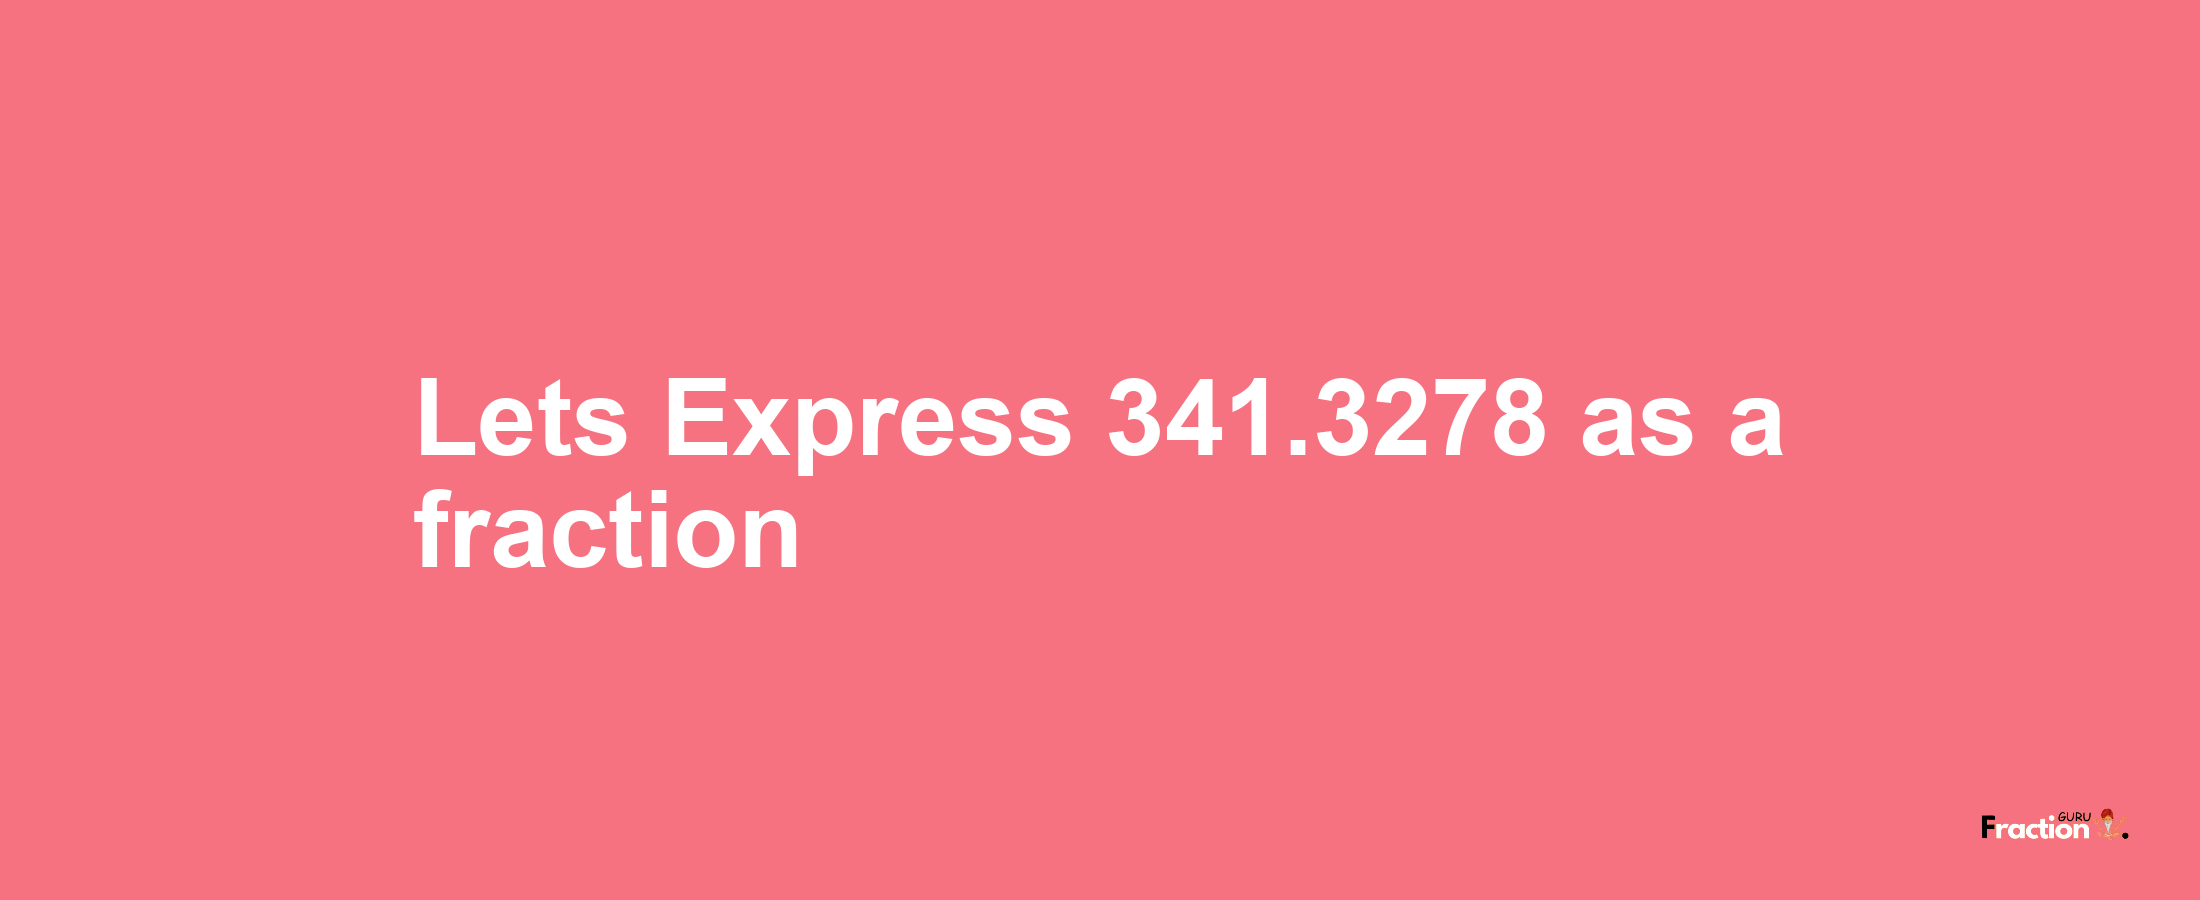 Lets Express 341.3278 as afraction